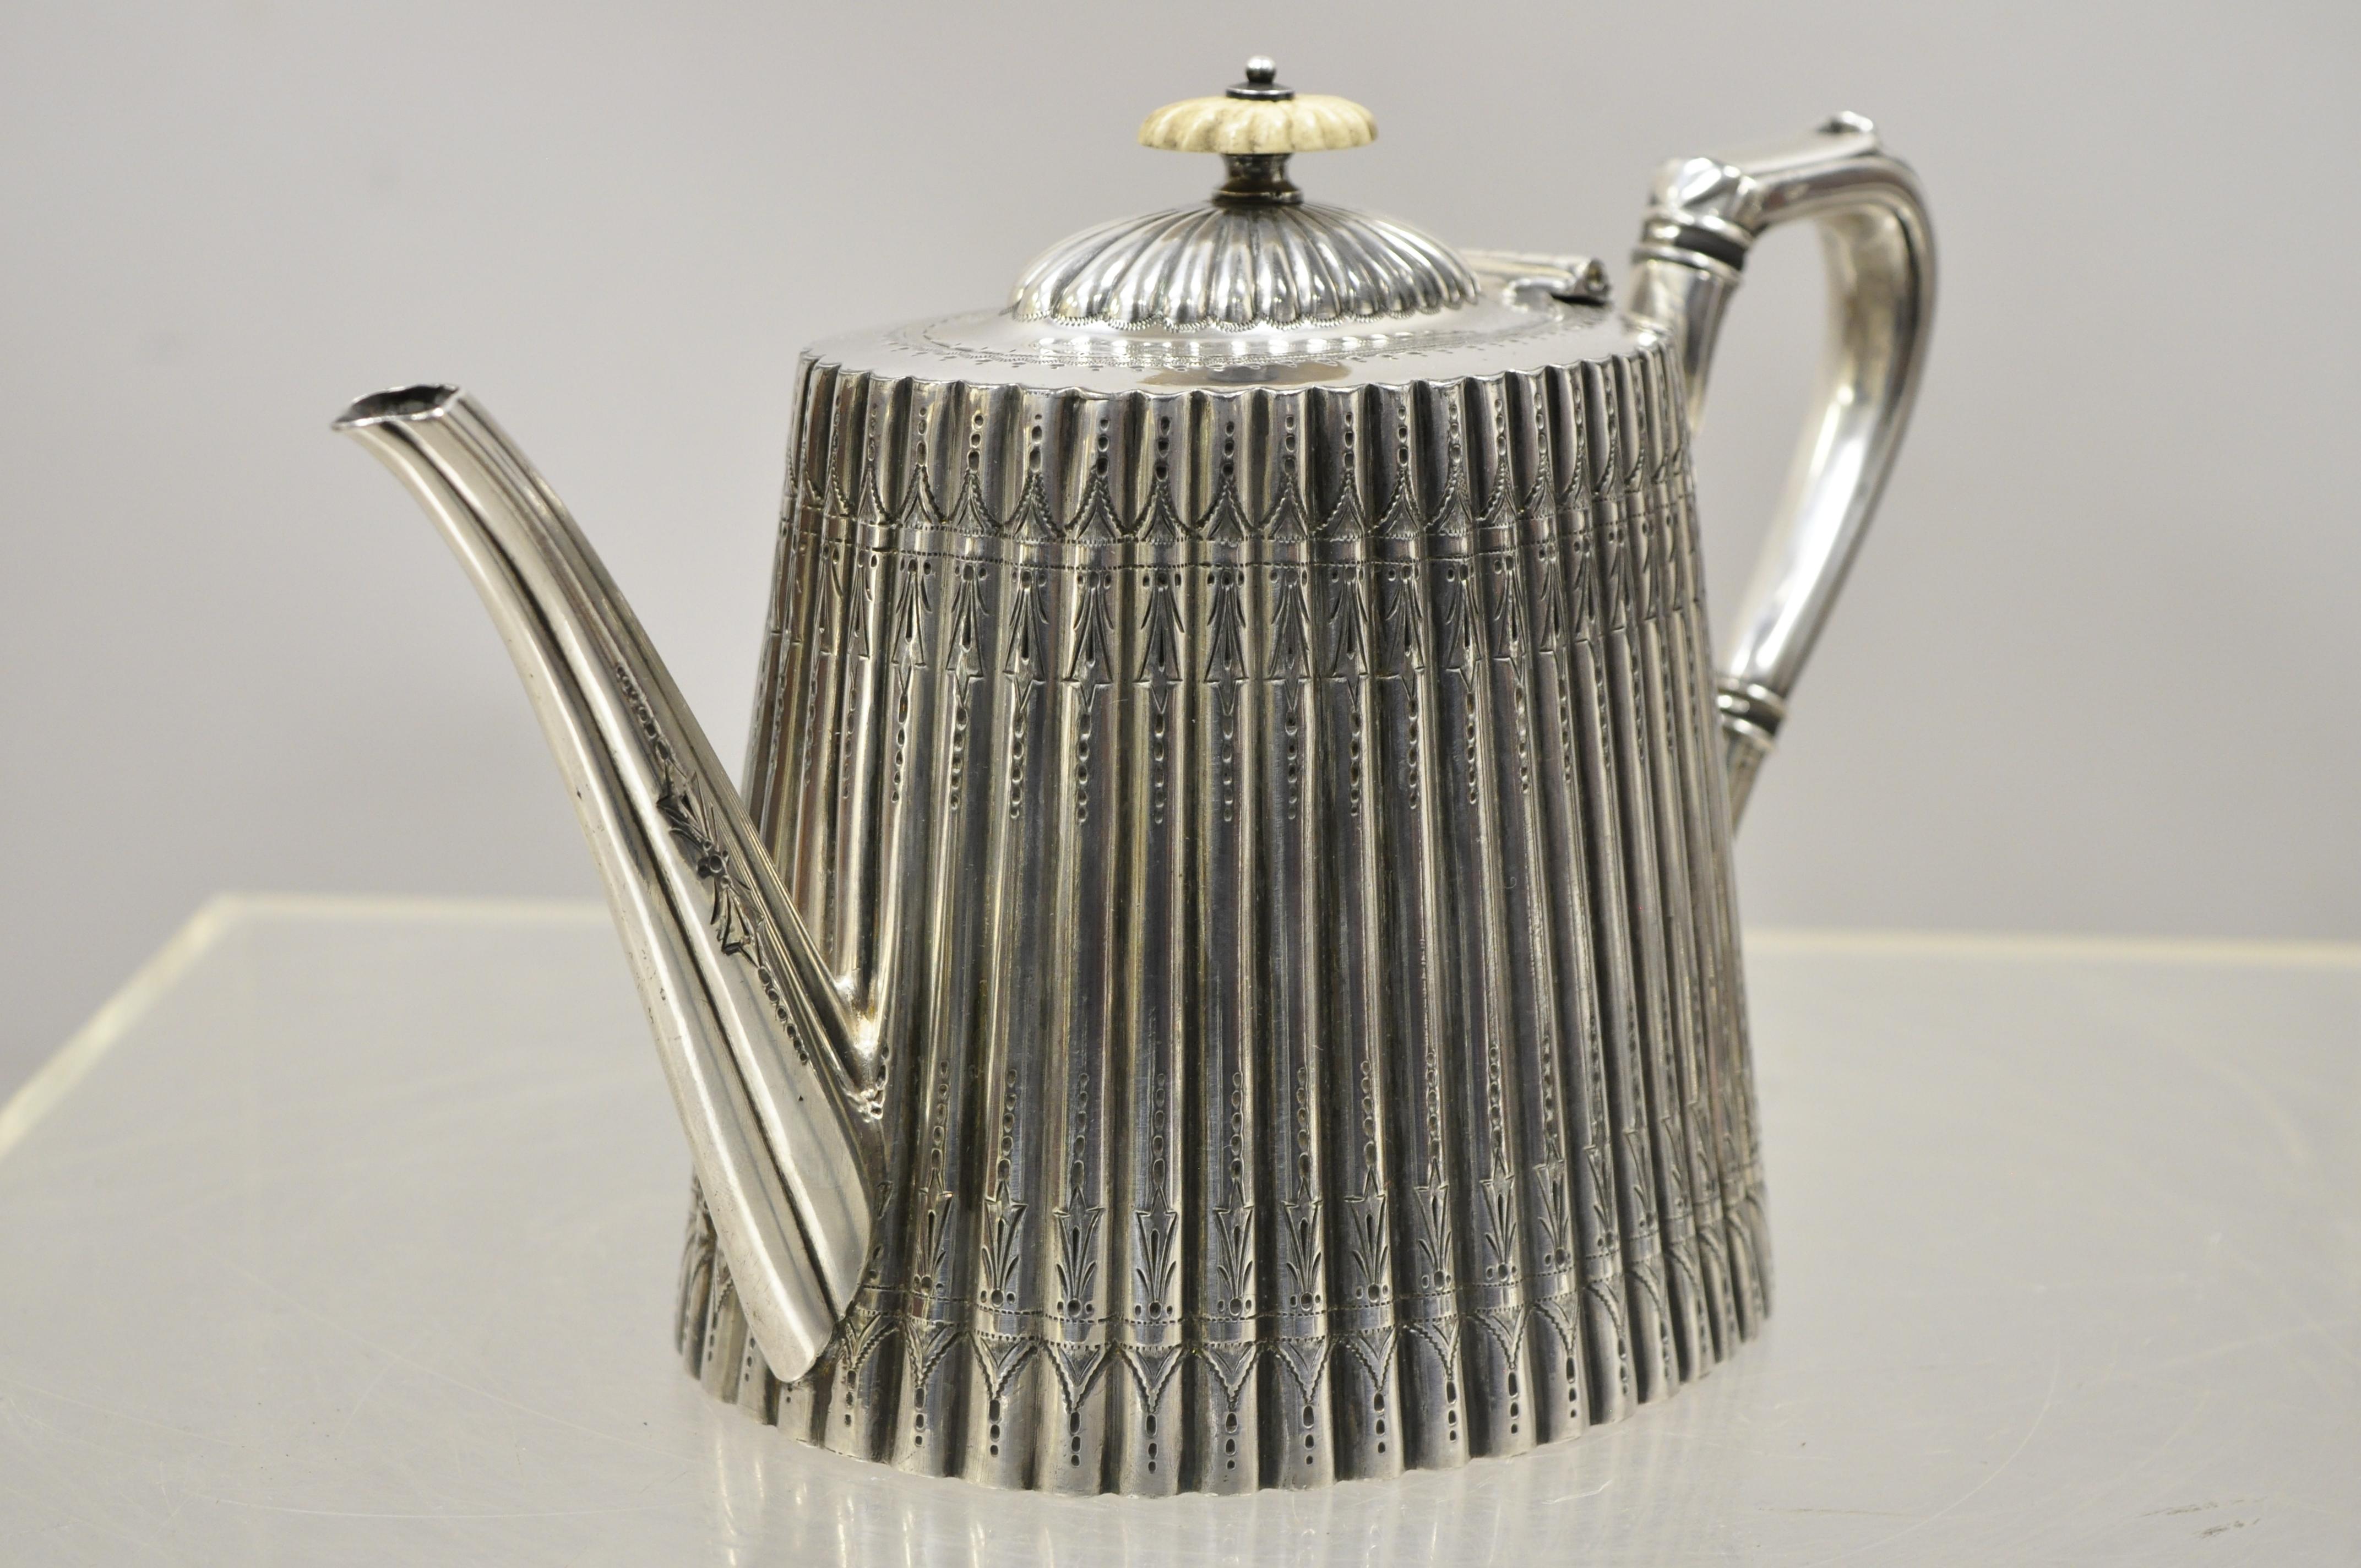 Alfred Lindley Sheffield English Edwardian Victorian silver plate chased teapot (E). Item features bone handle, chassed form, remarkable etchwork, original stamp, very nice antique item, circa late 19th-early 20th century. Measurements: 6.75